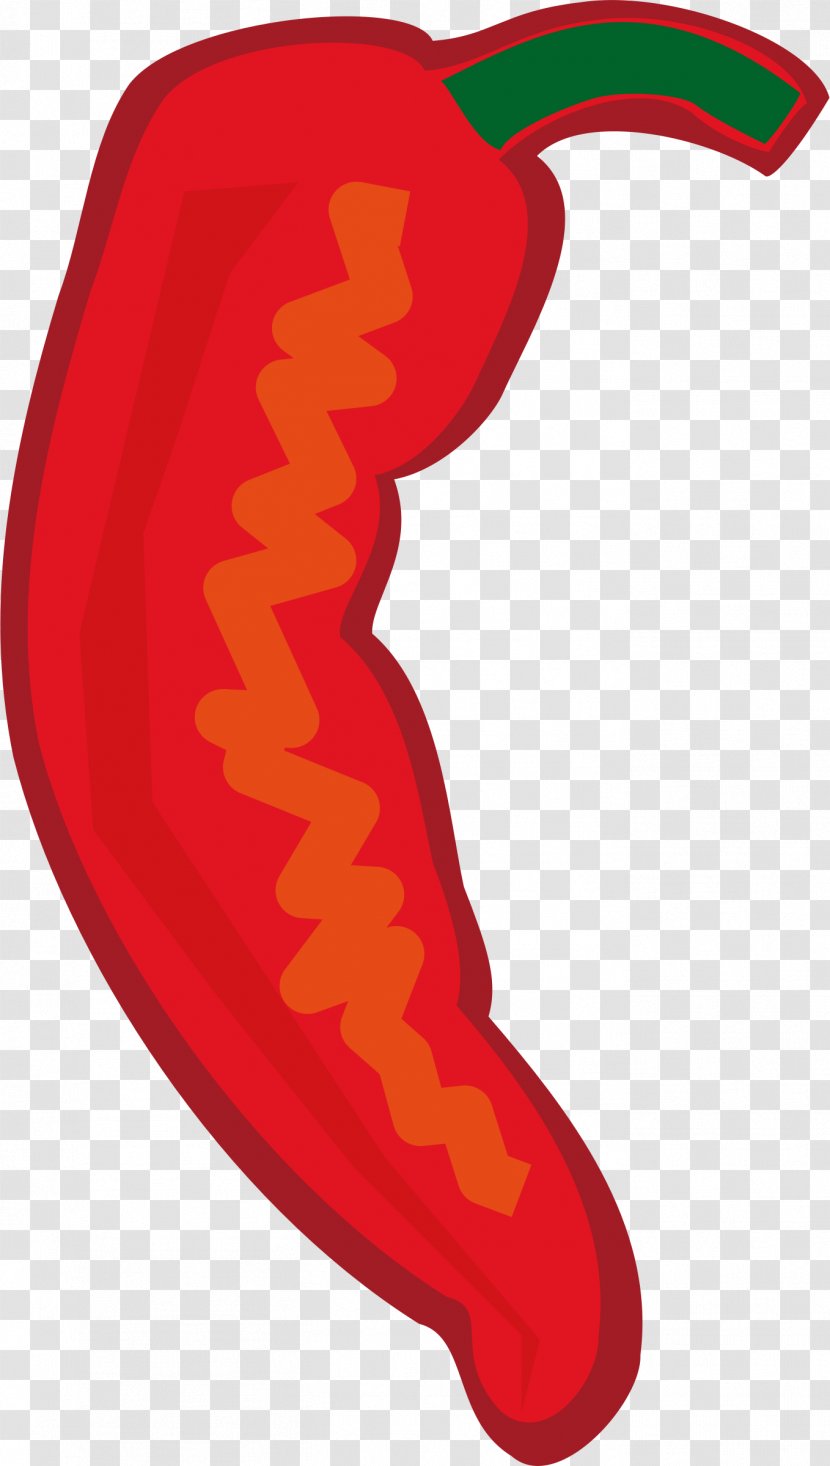 Vegetable Chili Pepper Fruit Clip Art - Spicy Food Transparent PNG